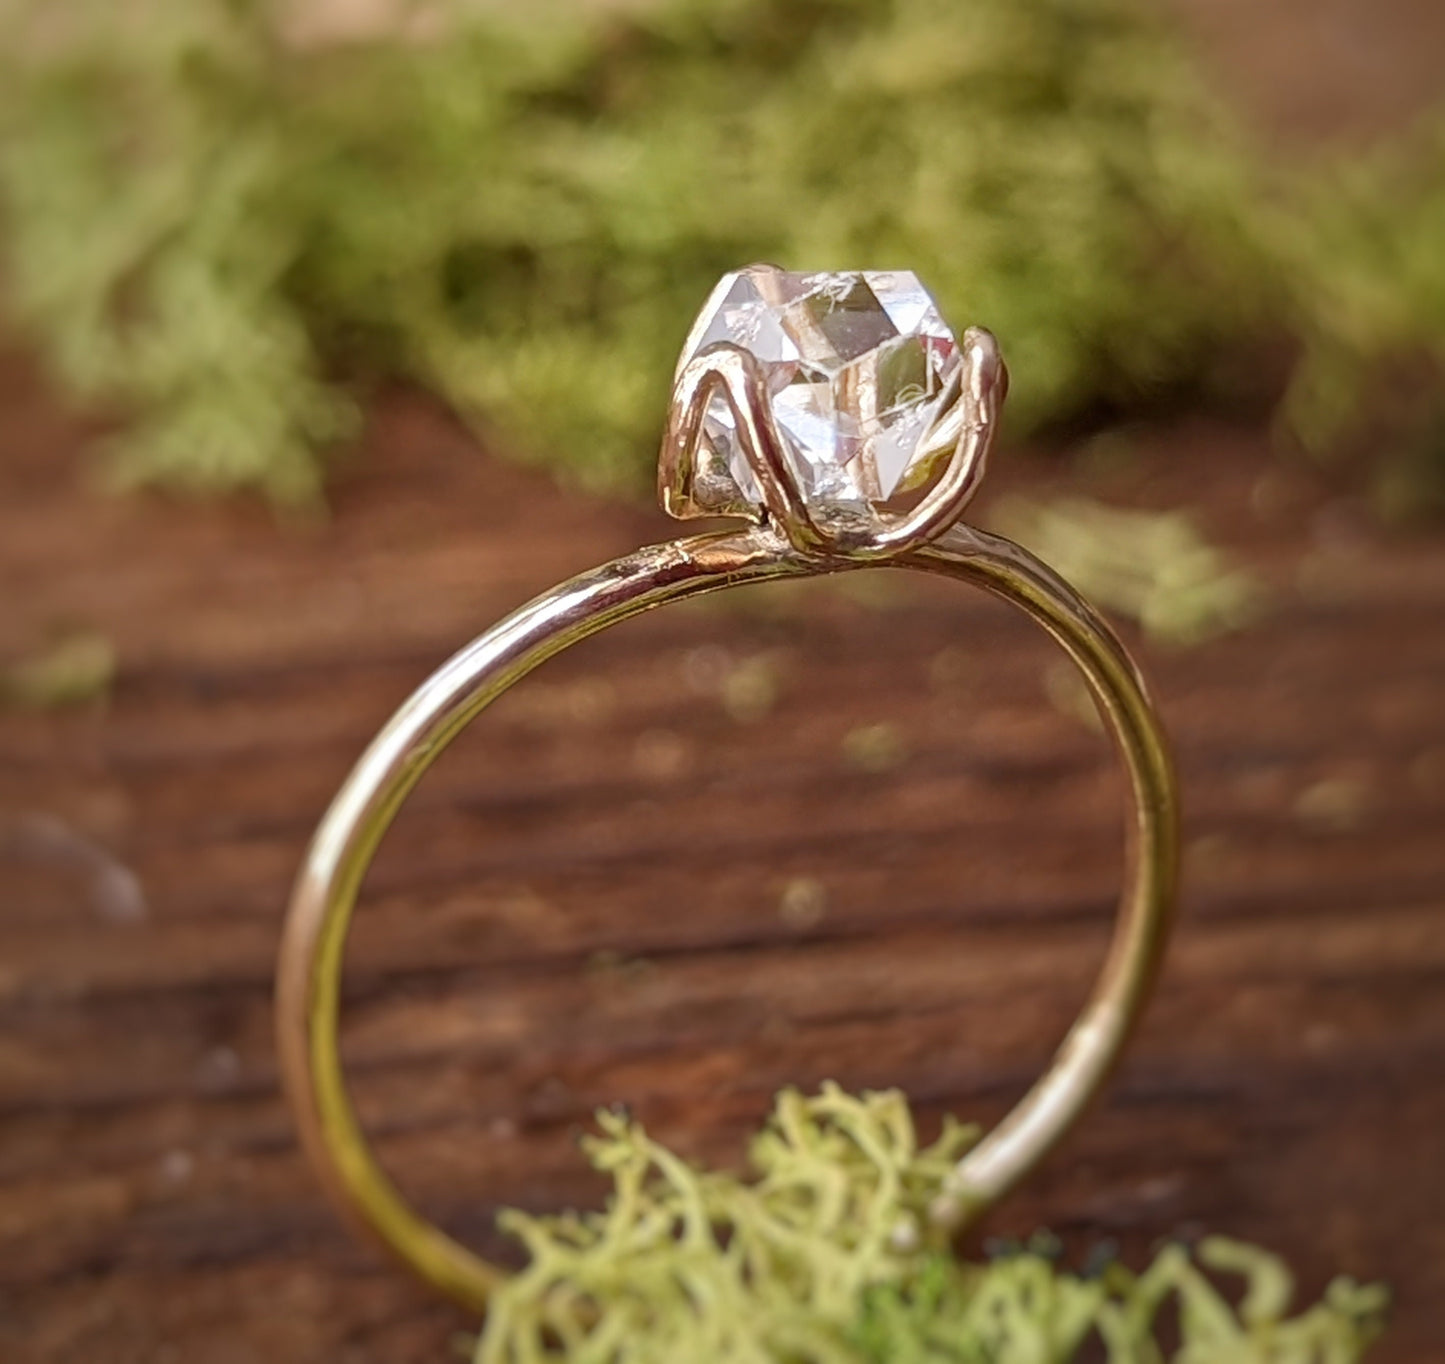 Herkimer diamond solitaire Engagement ring in Sterling Silver Flower prongs setting